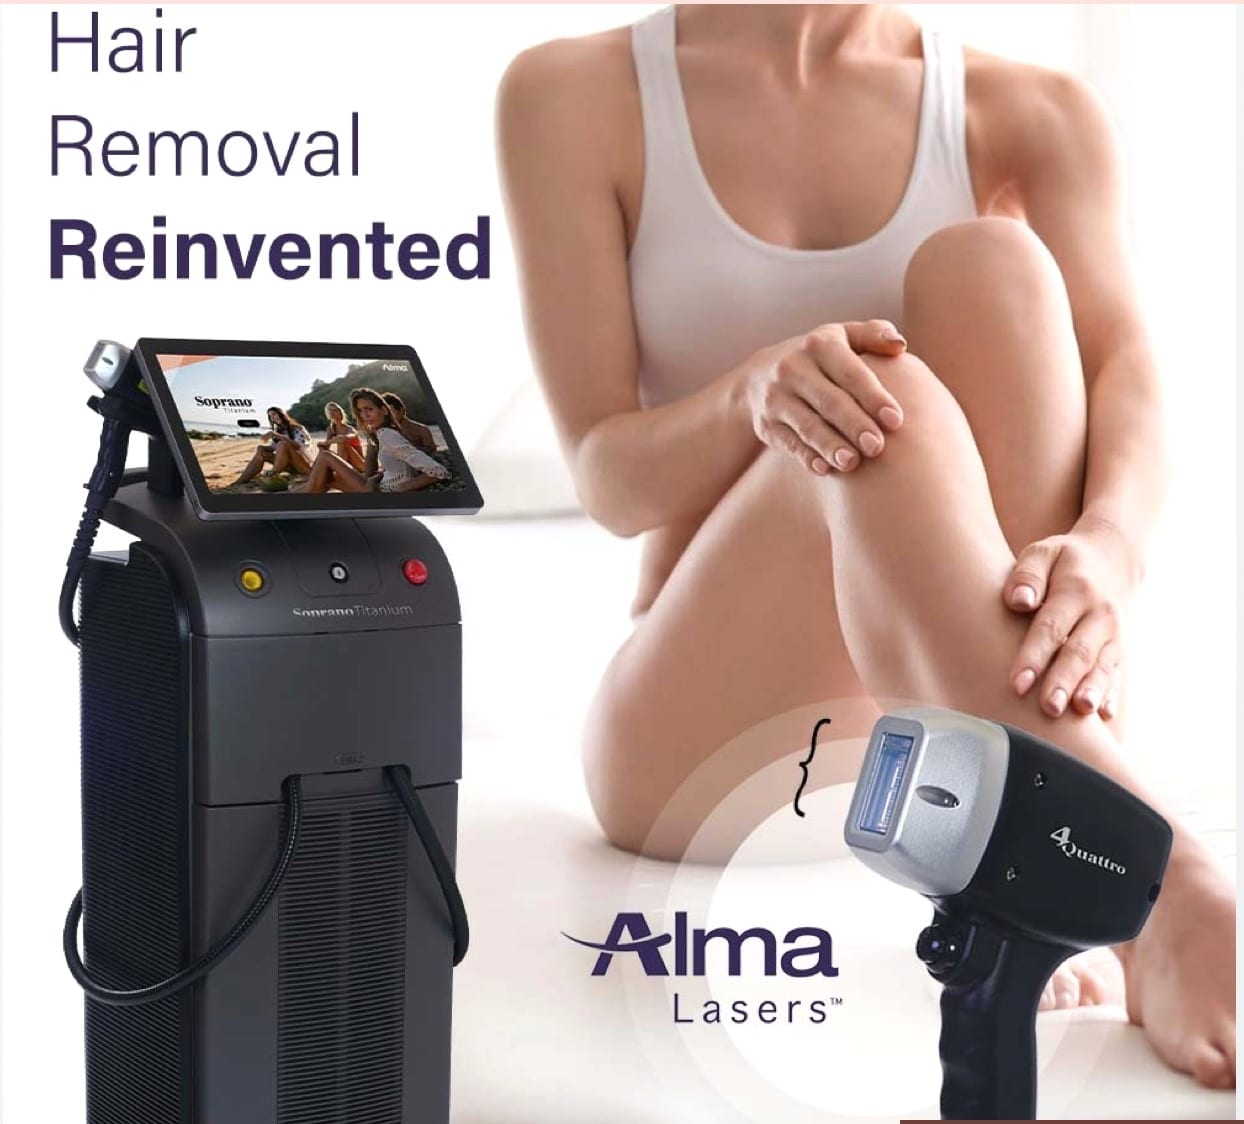 Hair Removal Reinvented 1920w